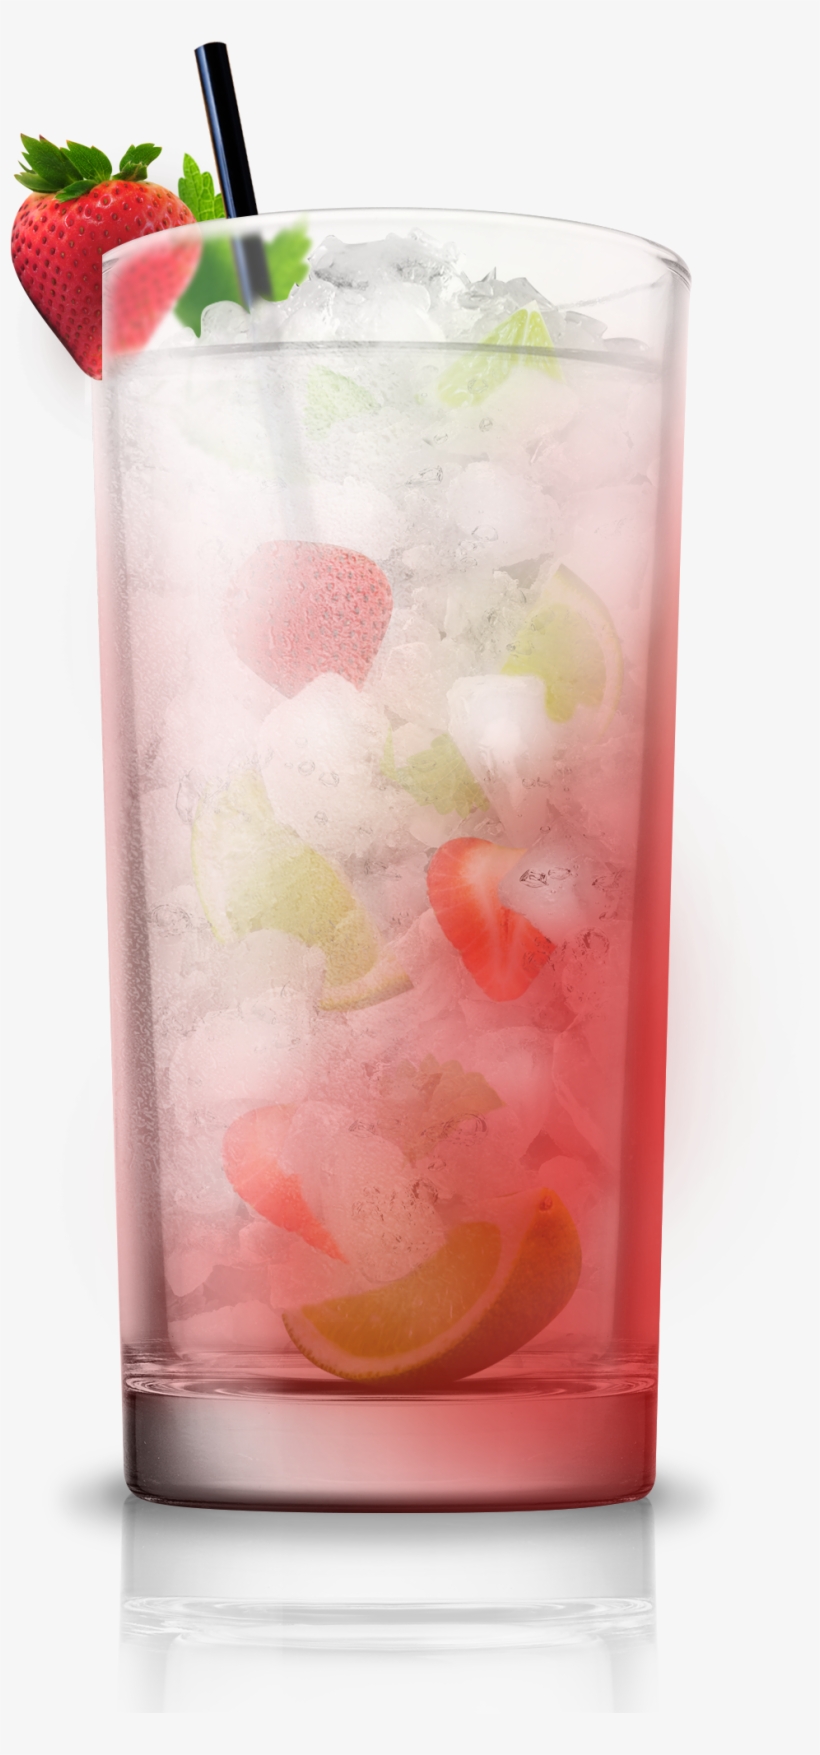 Strawberry Mojito - Strawberry Mojito Cocktail Png, transparent png #8137214